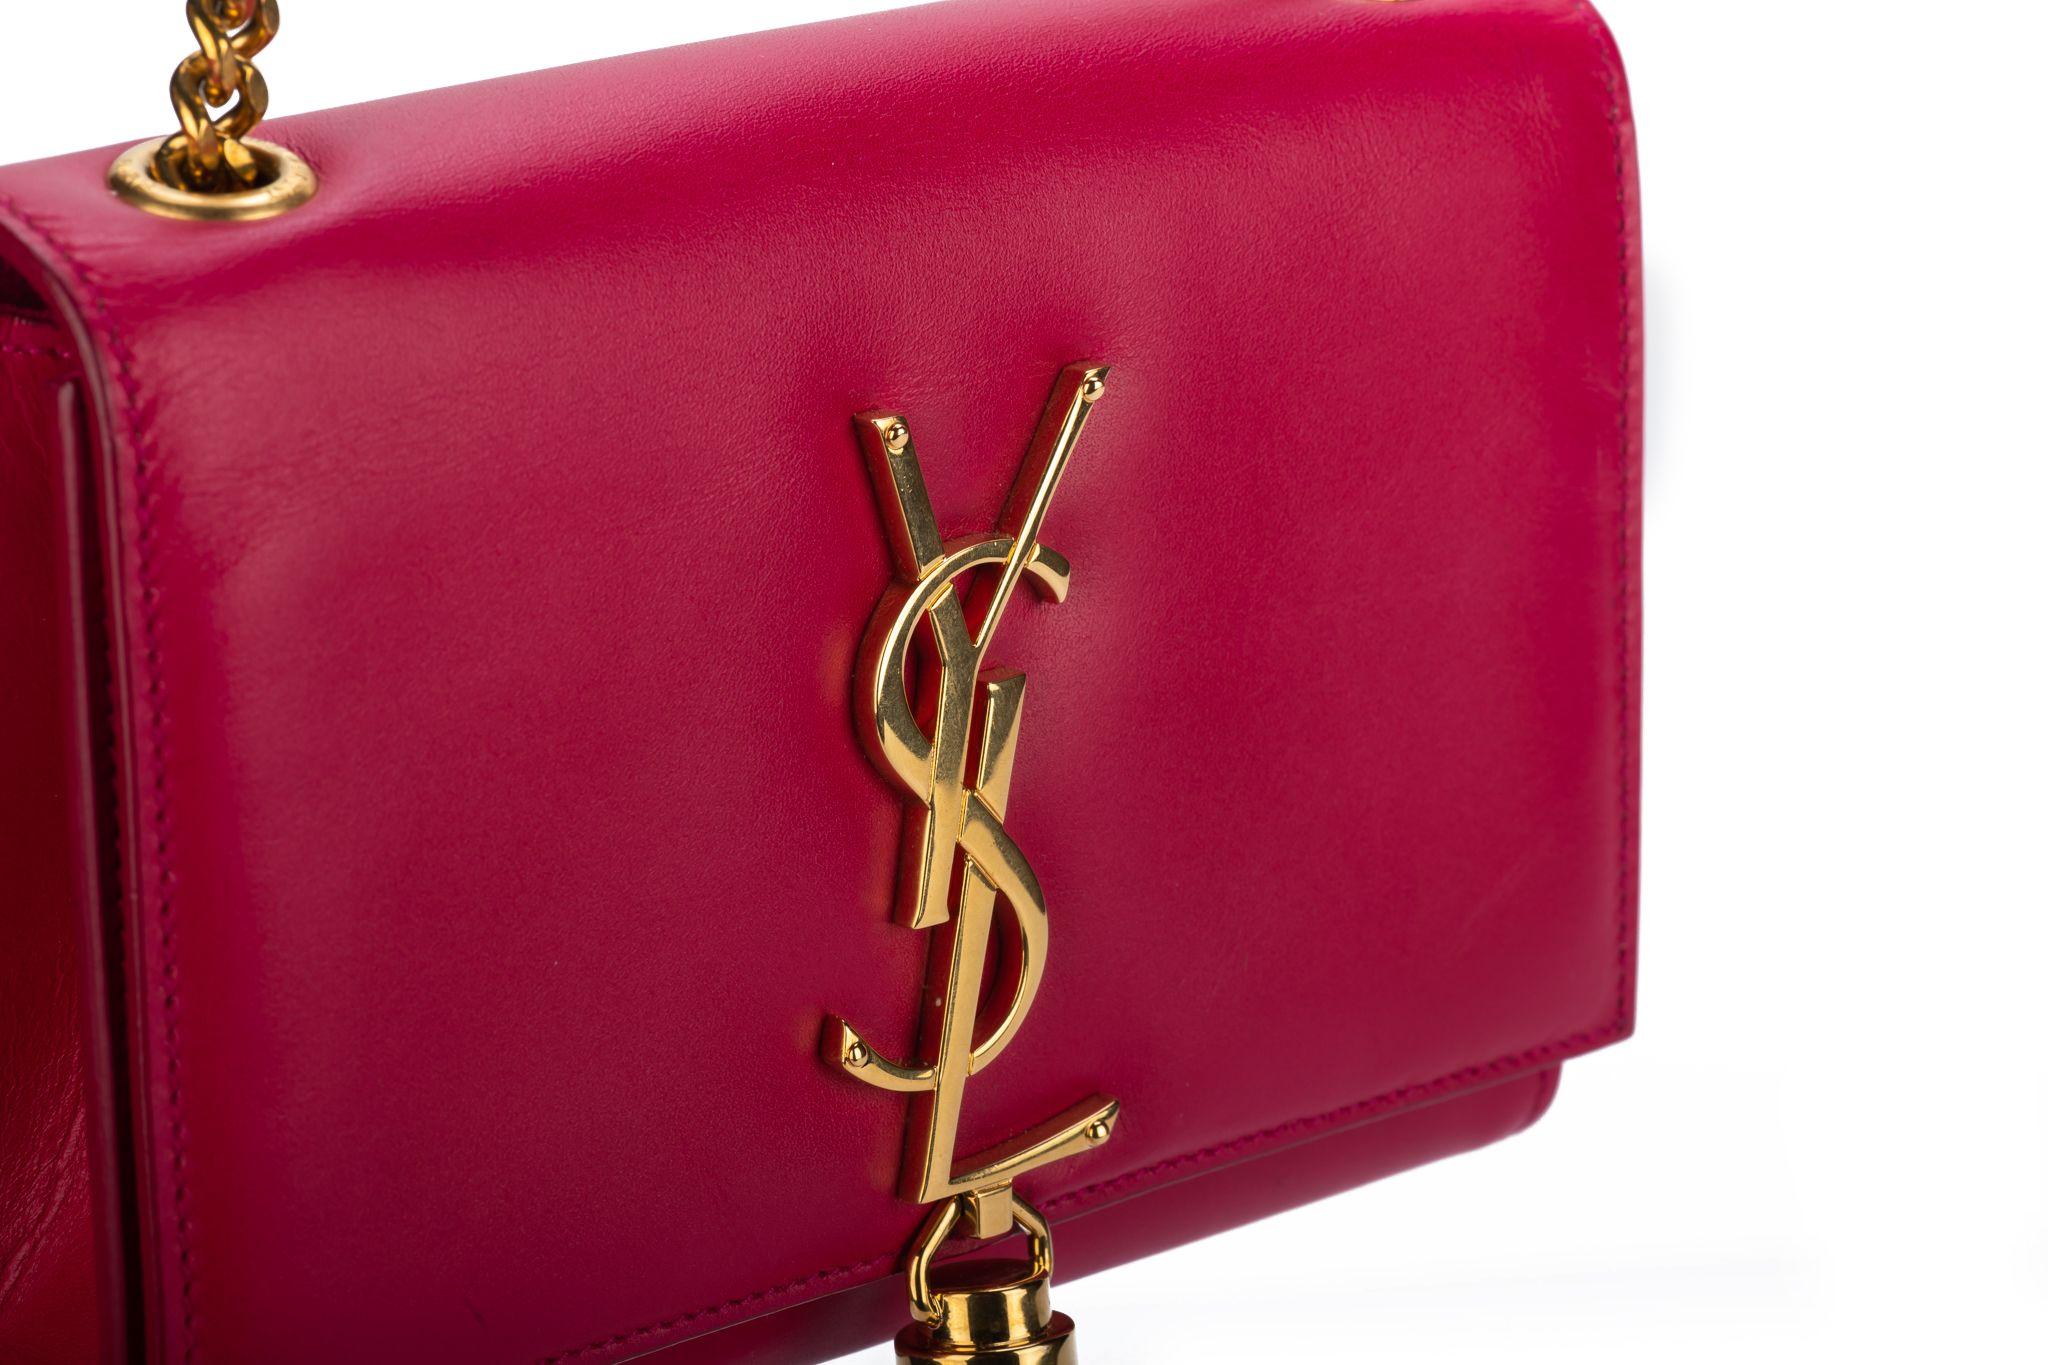 Yves Saint Laurent Fuchsia Leather Cross Body Bag In Excellent Condition For Sale In West Hollywood, CA